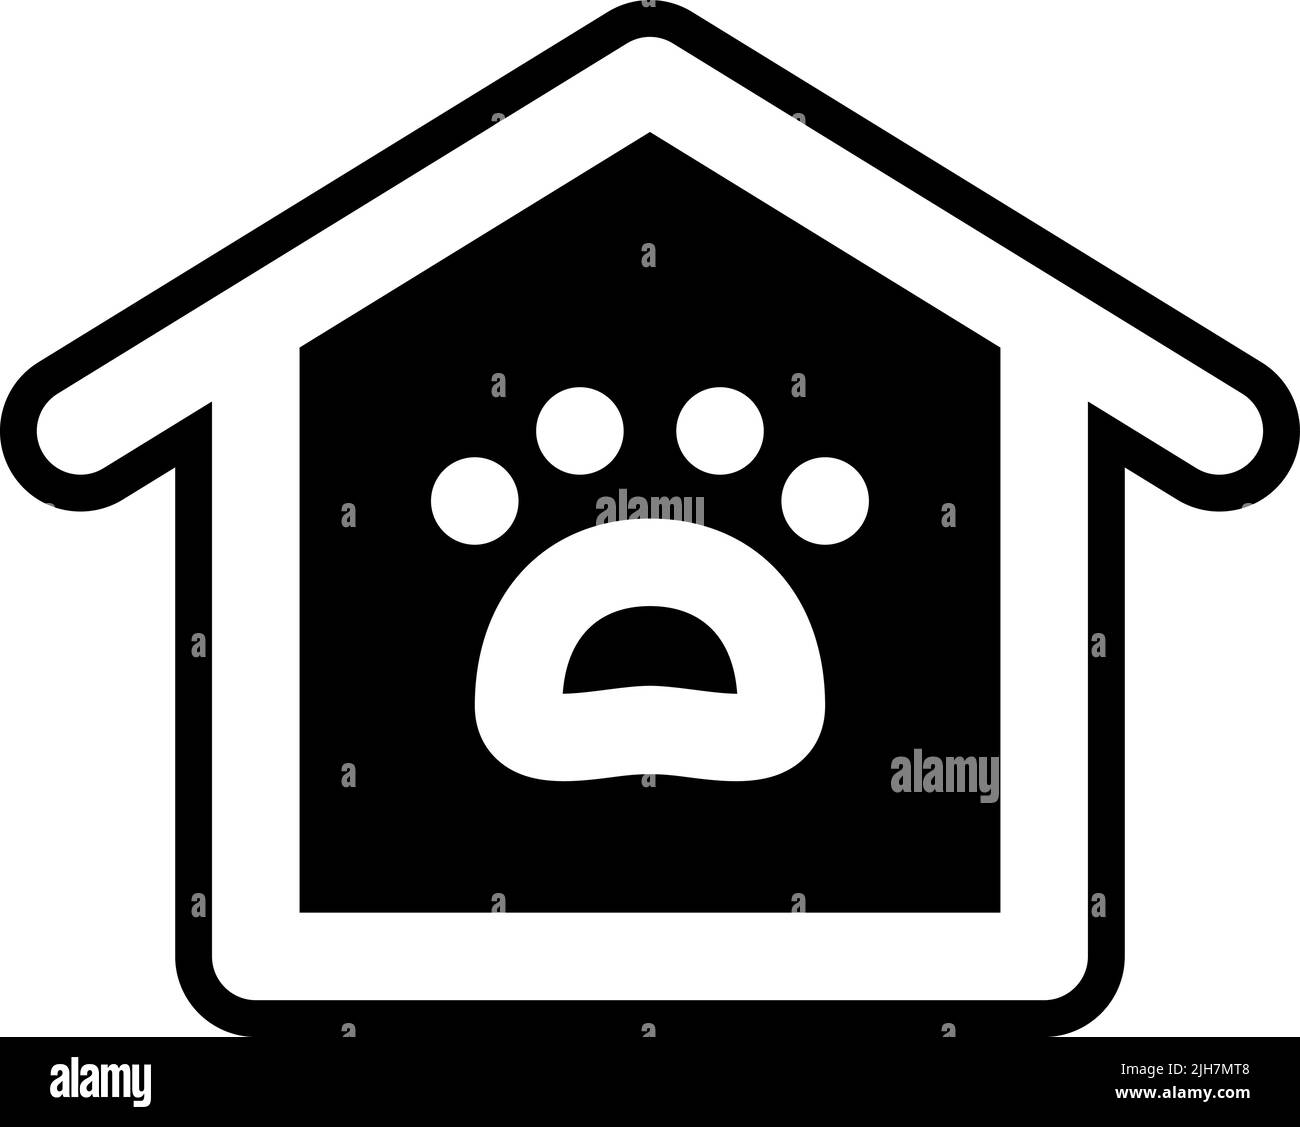 Real estate pet house icon Stock Vector